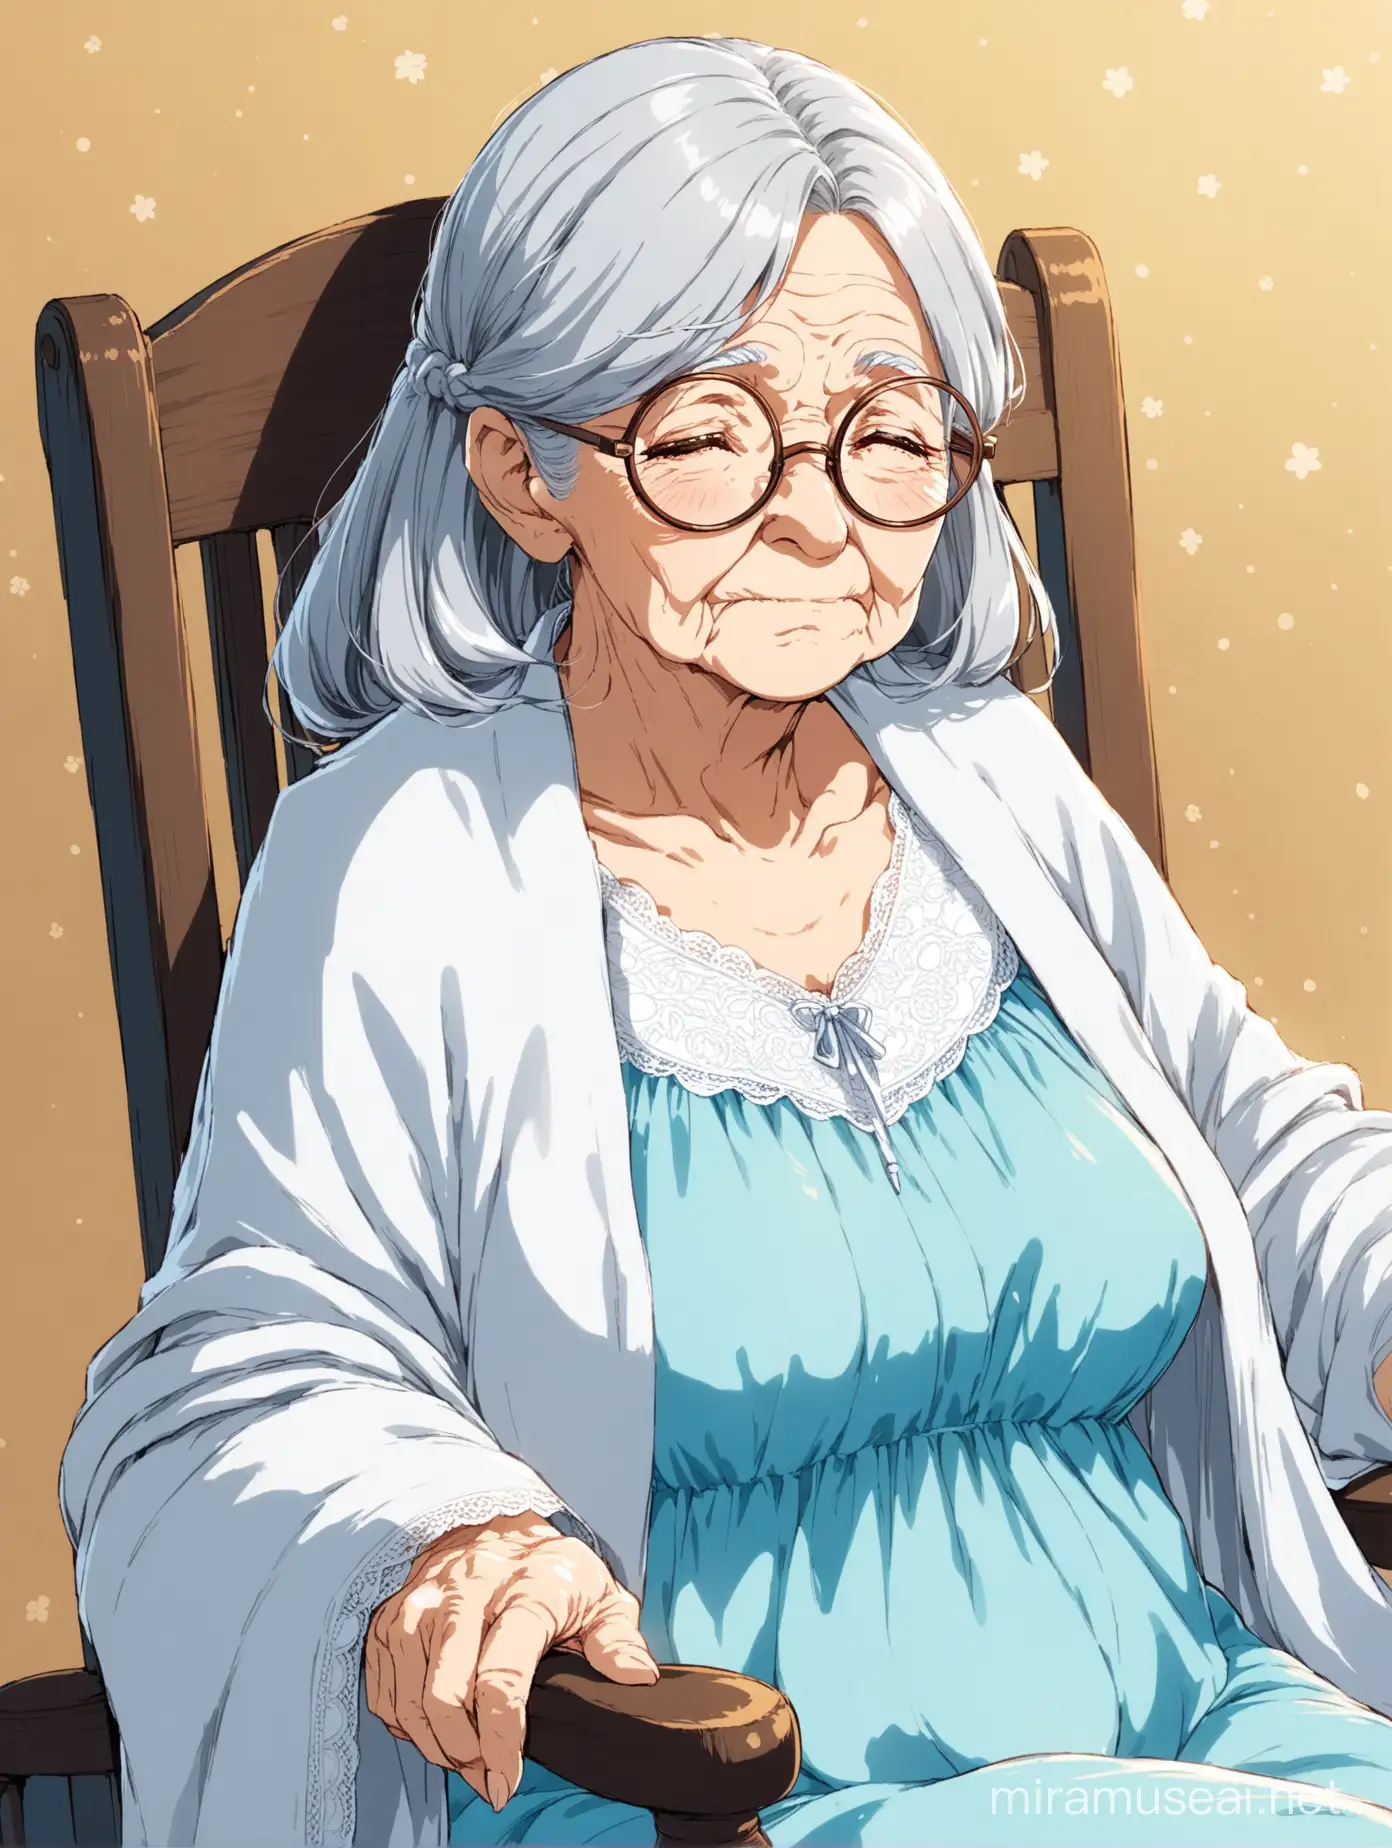 Elderly Anime Woman Relaxing on Rocking Chair in Light Blue Nightgown